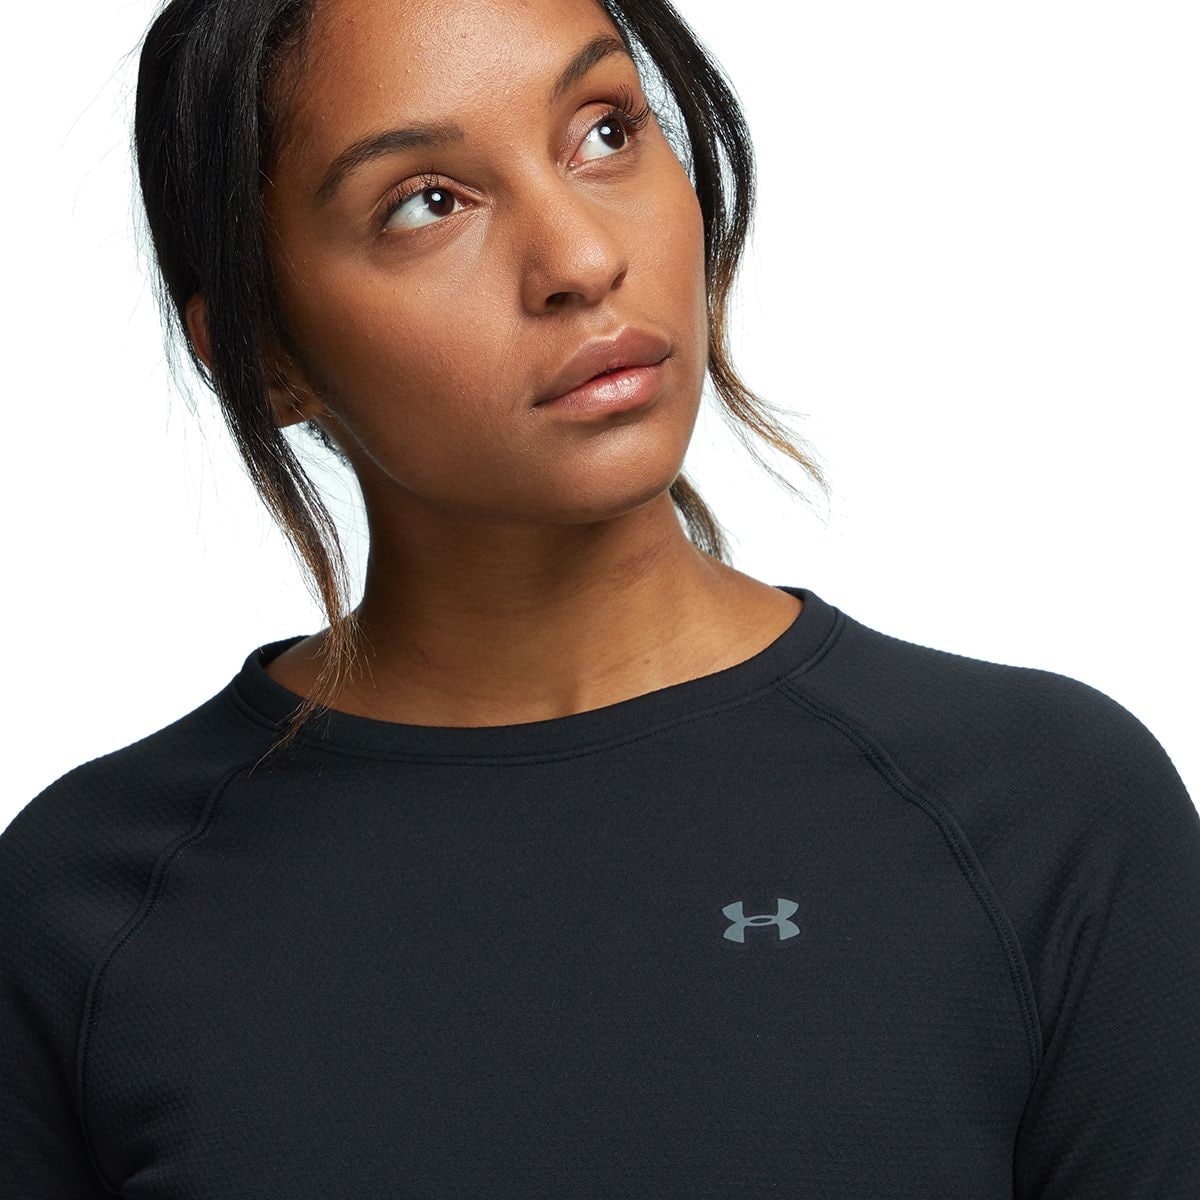 Under Armour Base 4.0 Crew - Women's - Clothing